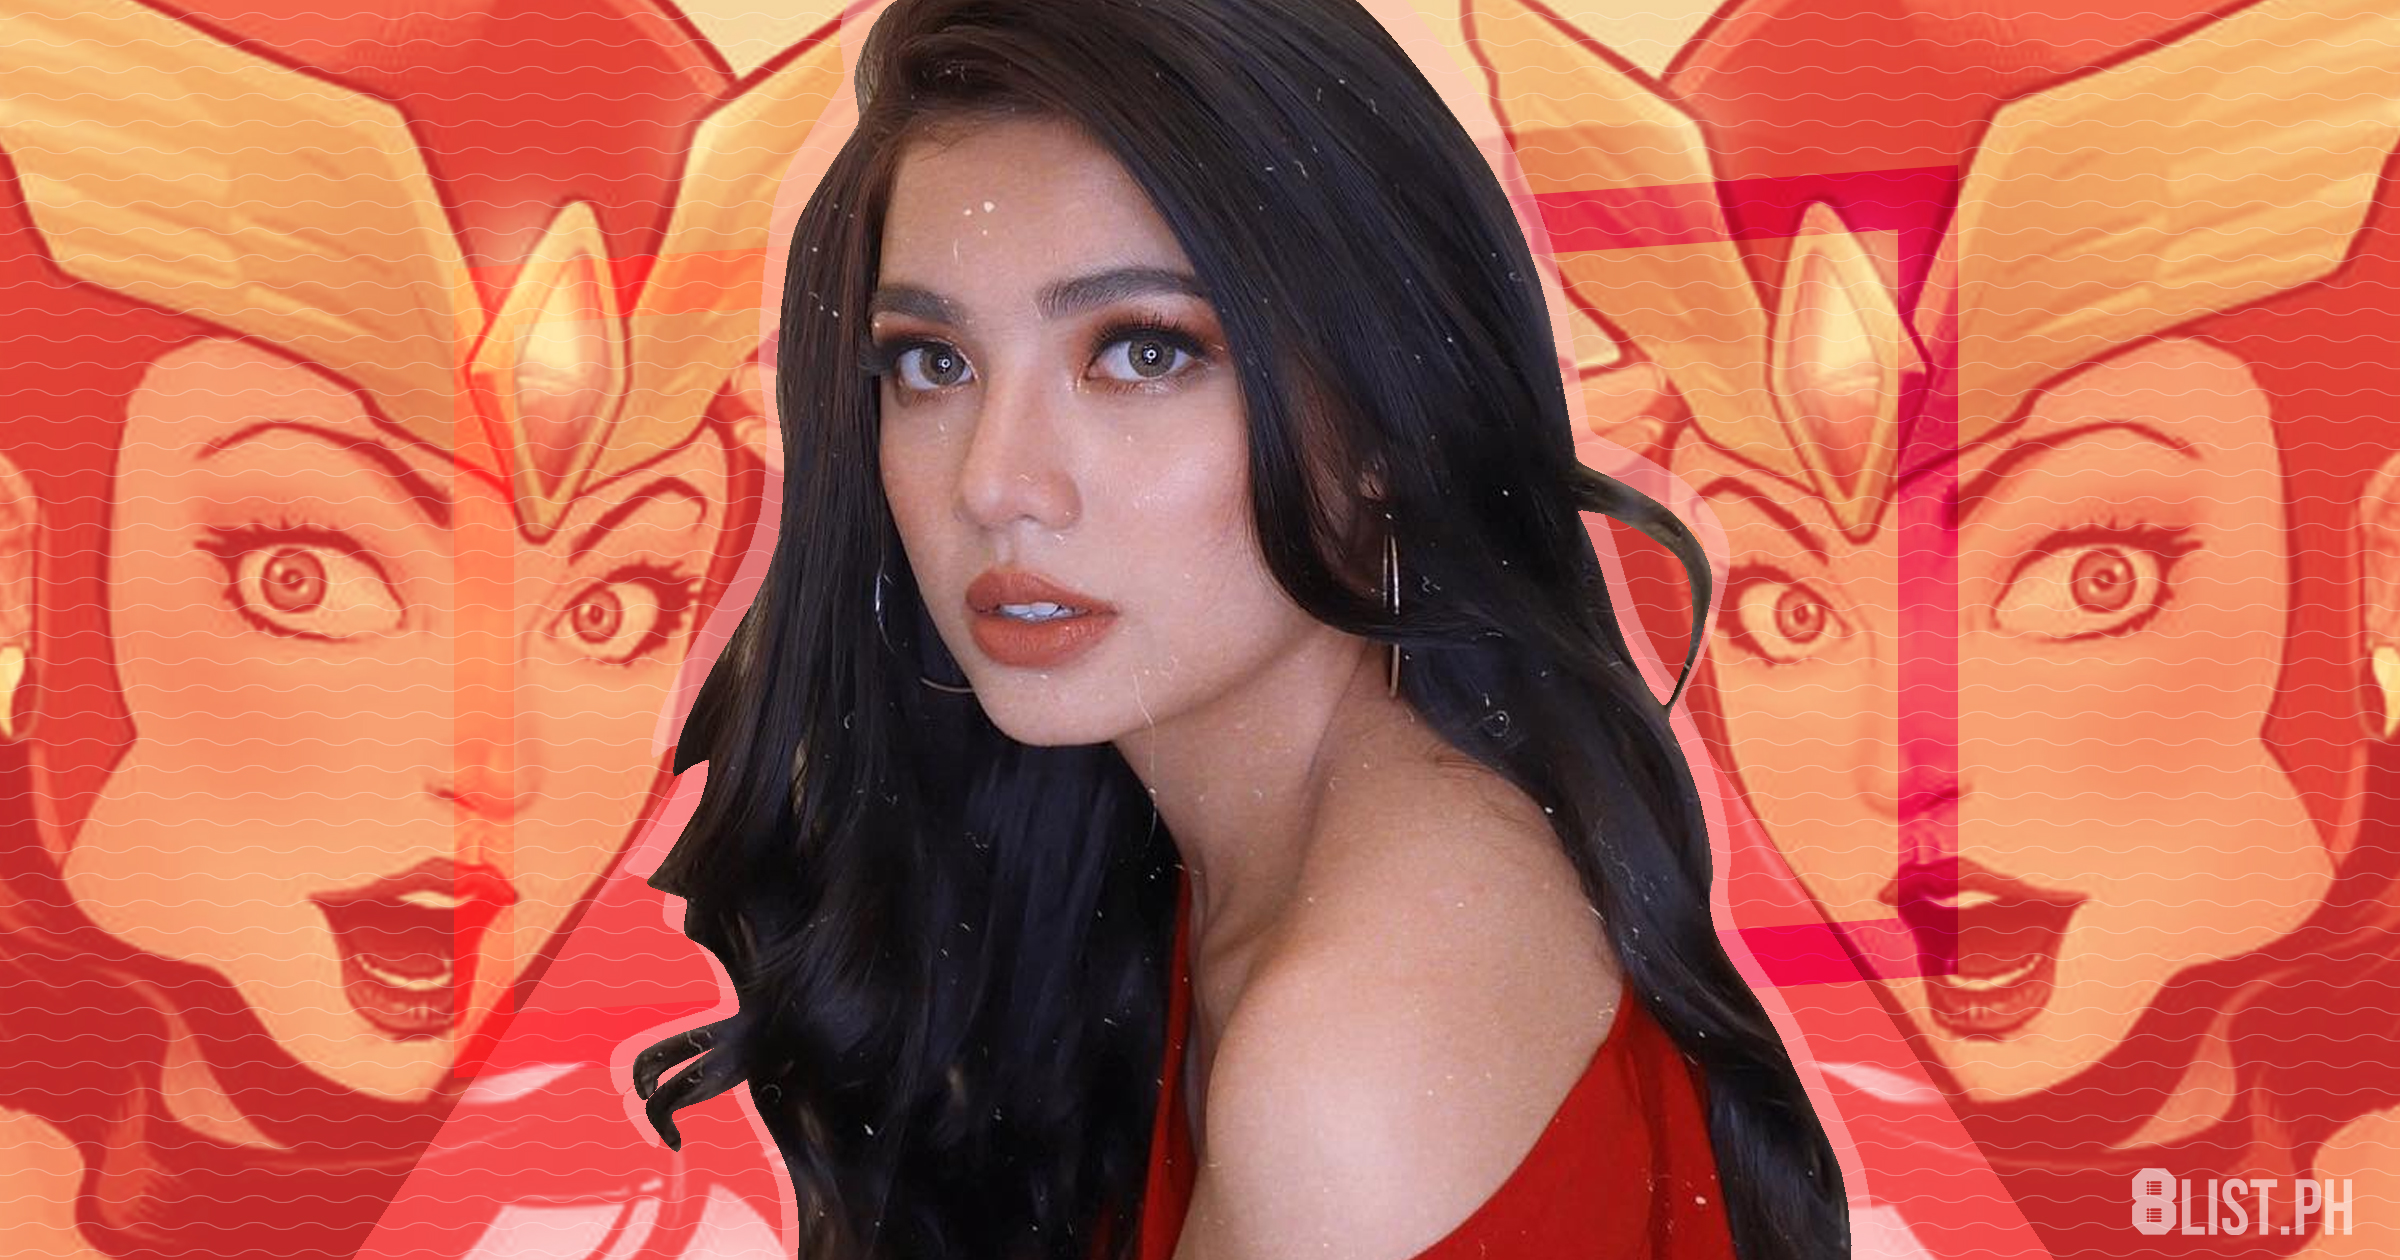 Fast Facts About Our New Darna Jane de Leon - 8List.ph